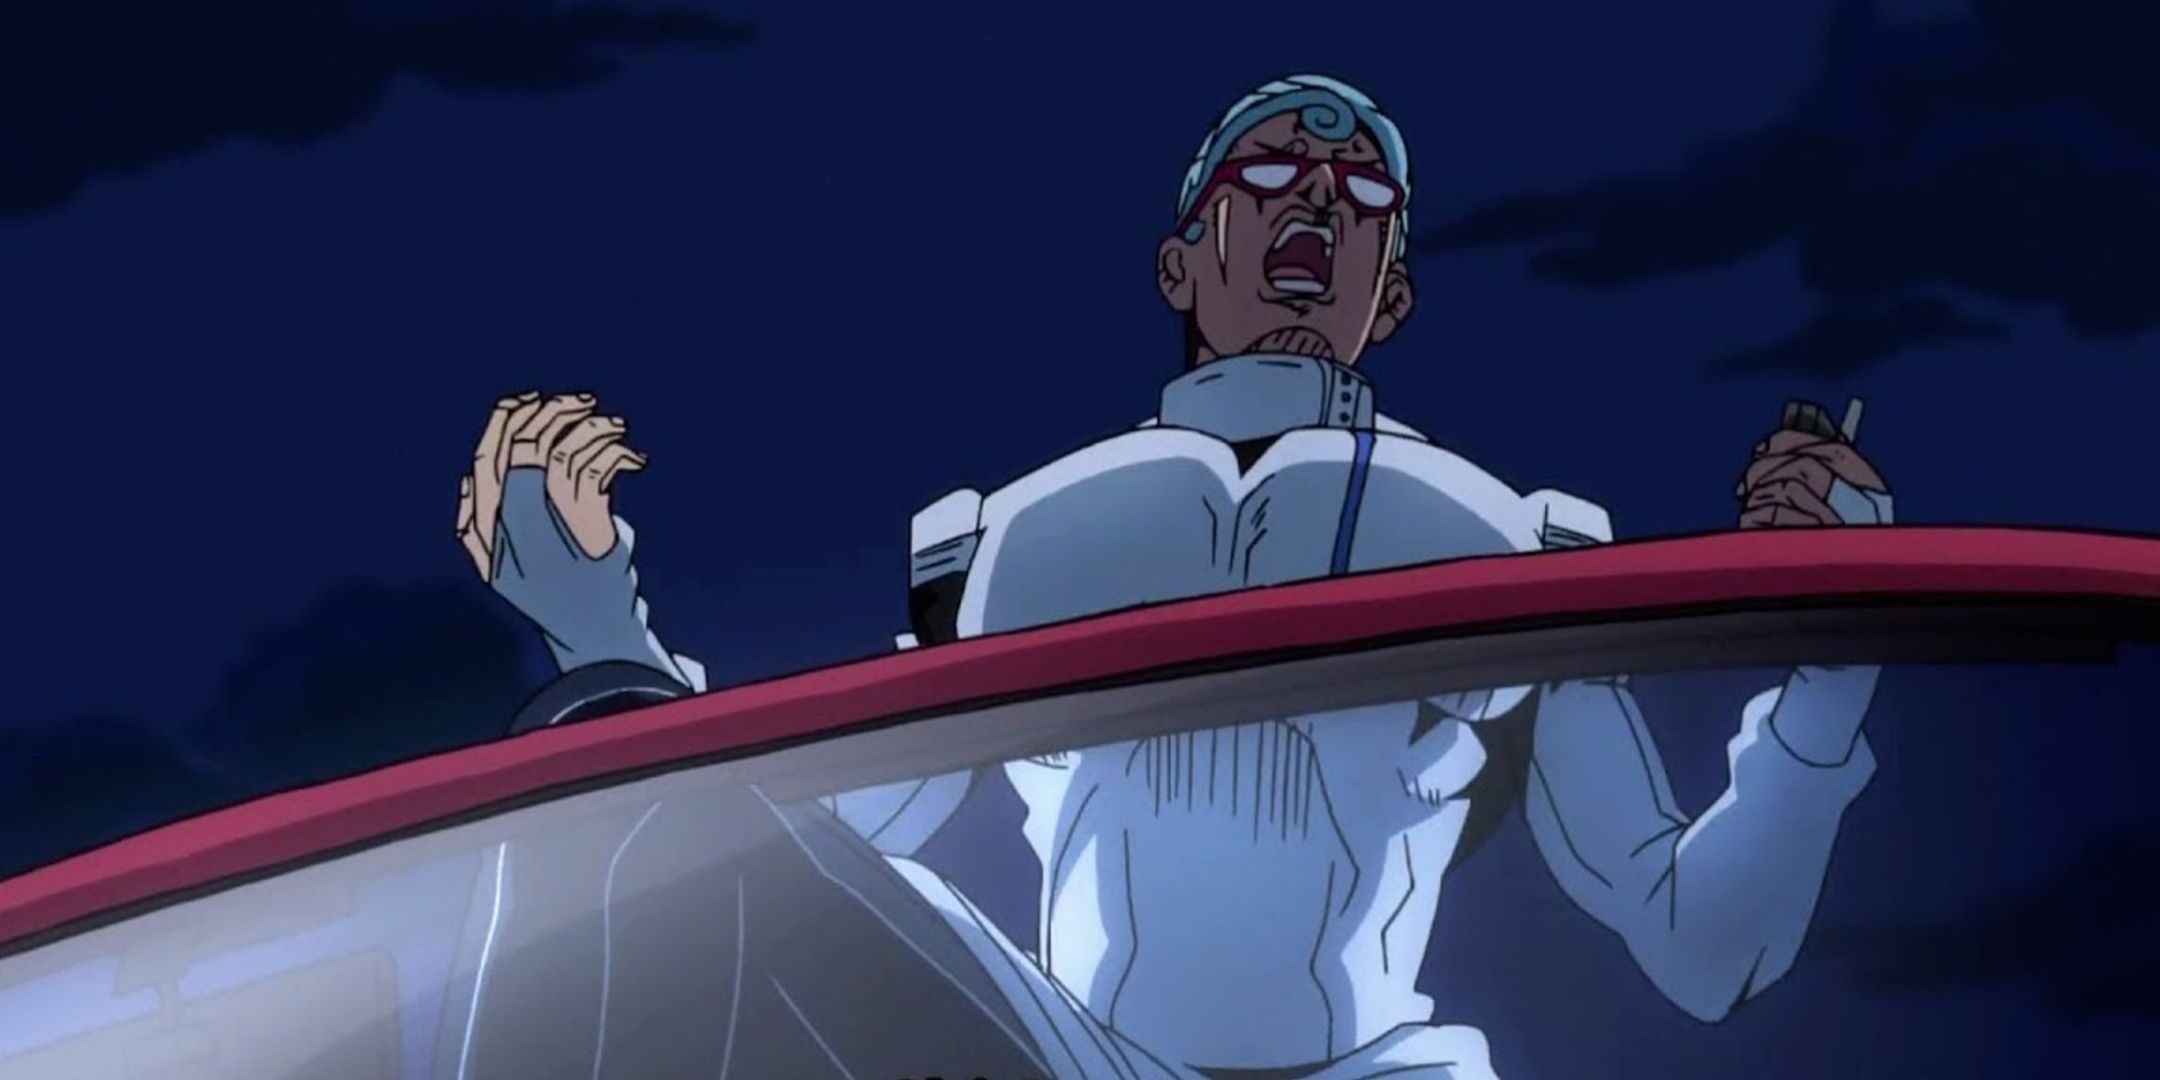 ghiaccio is angry